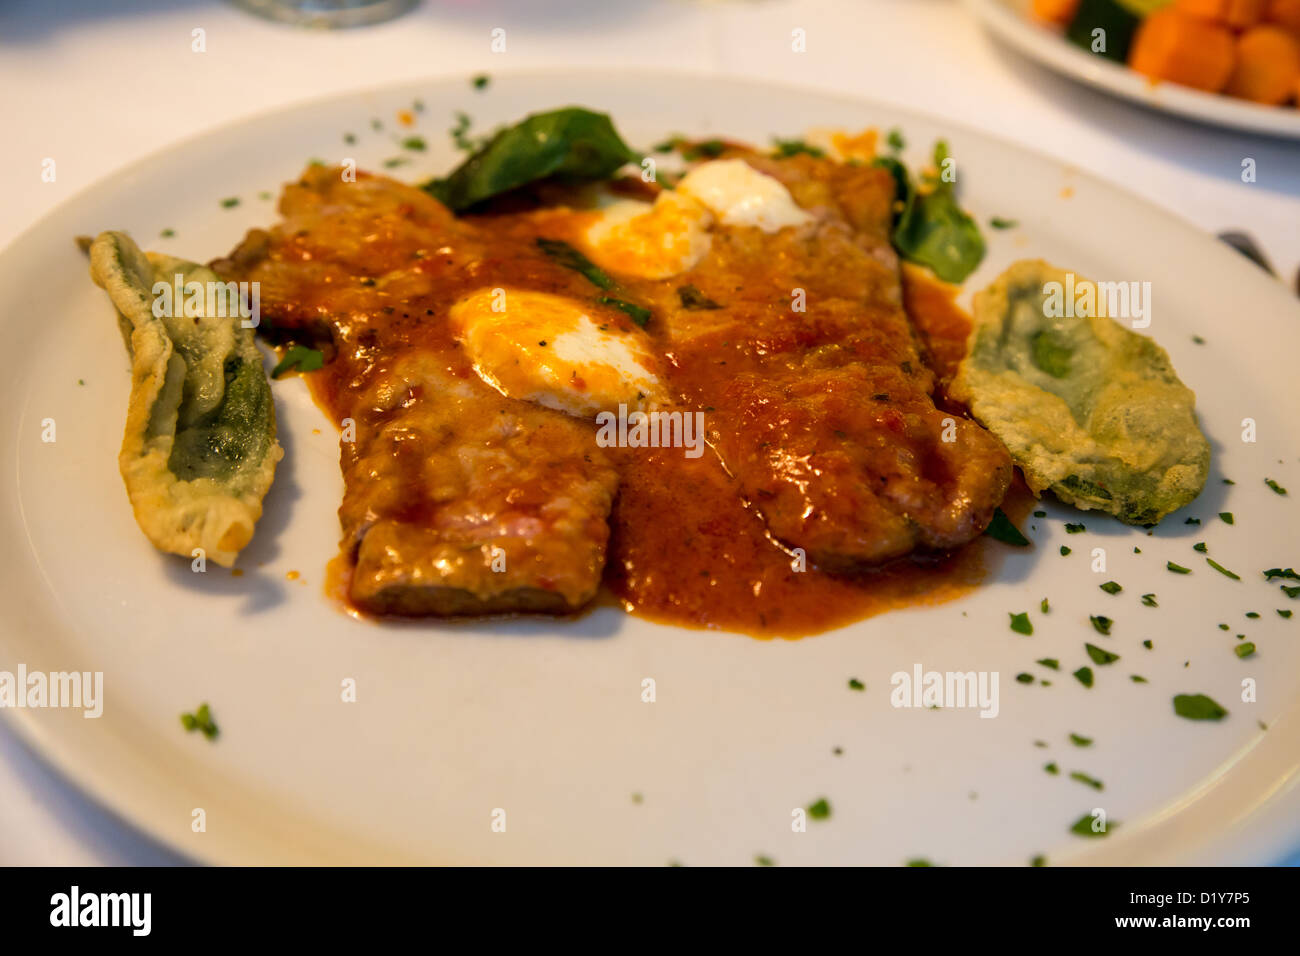 A dish of Veal with fried sage leaves in a restaurant in Turin Italy Stock Photo